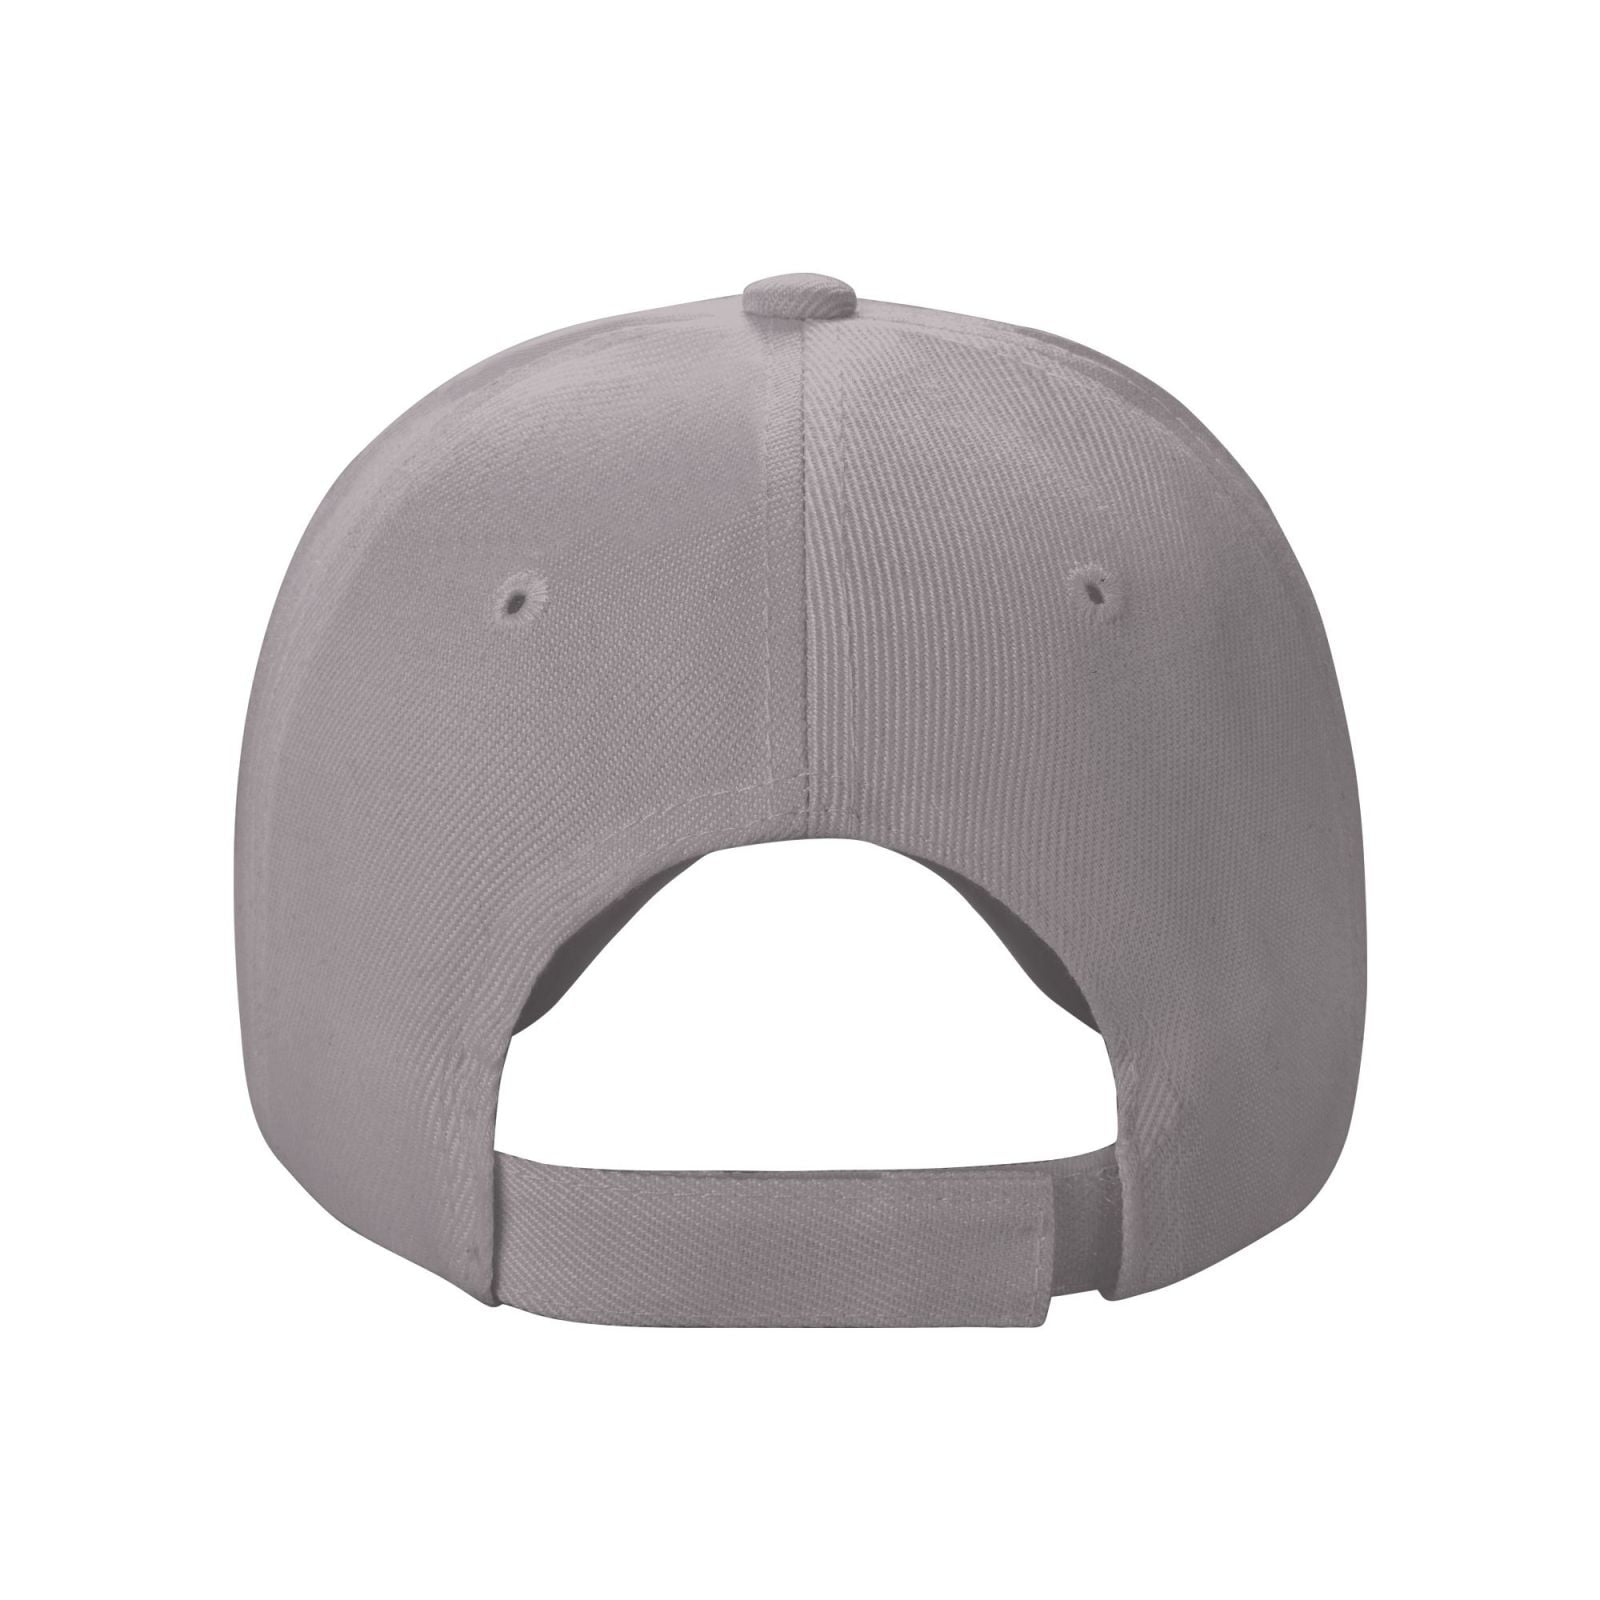 Casquette baseball grise homme - MODISSIMA - chh33